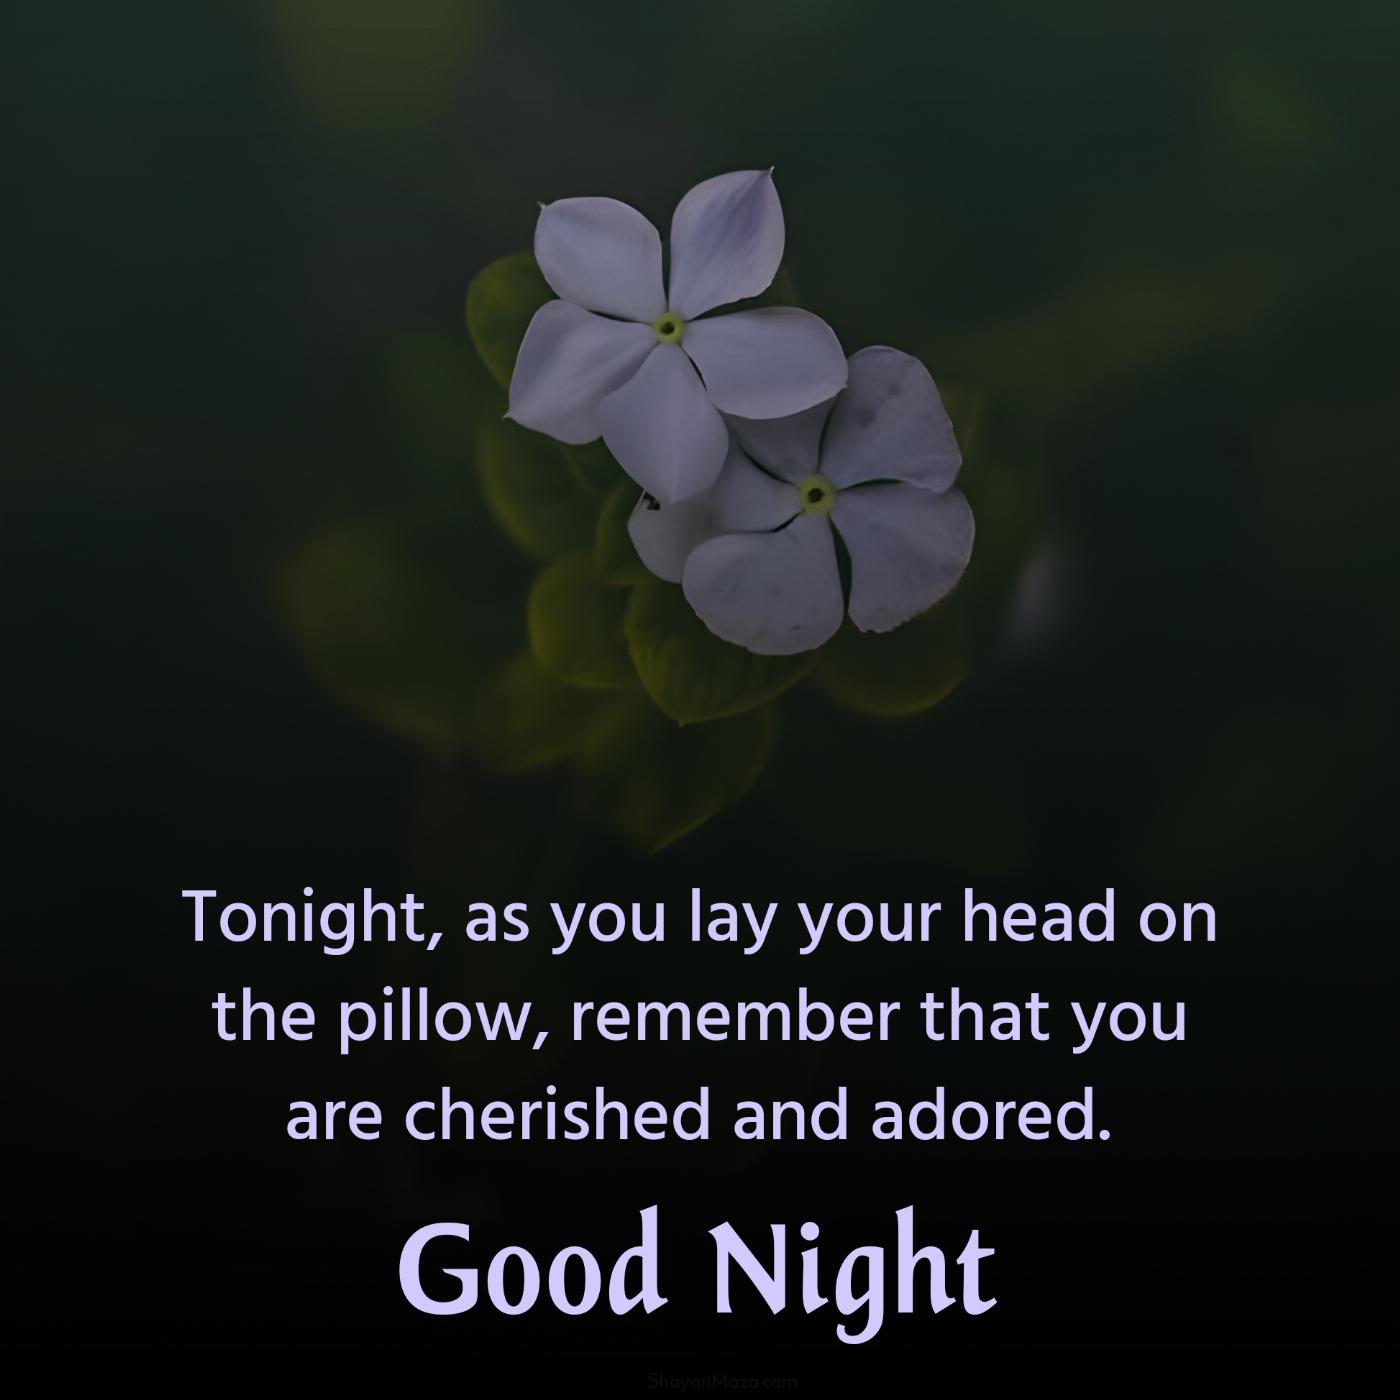 Tonight as you lay your head on the pillow remember that